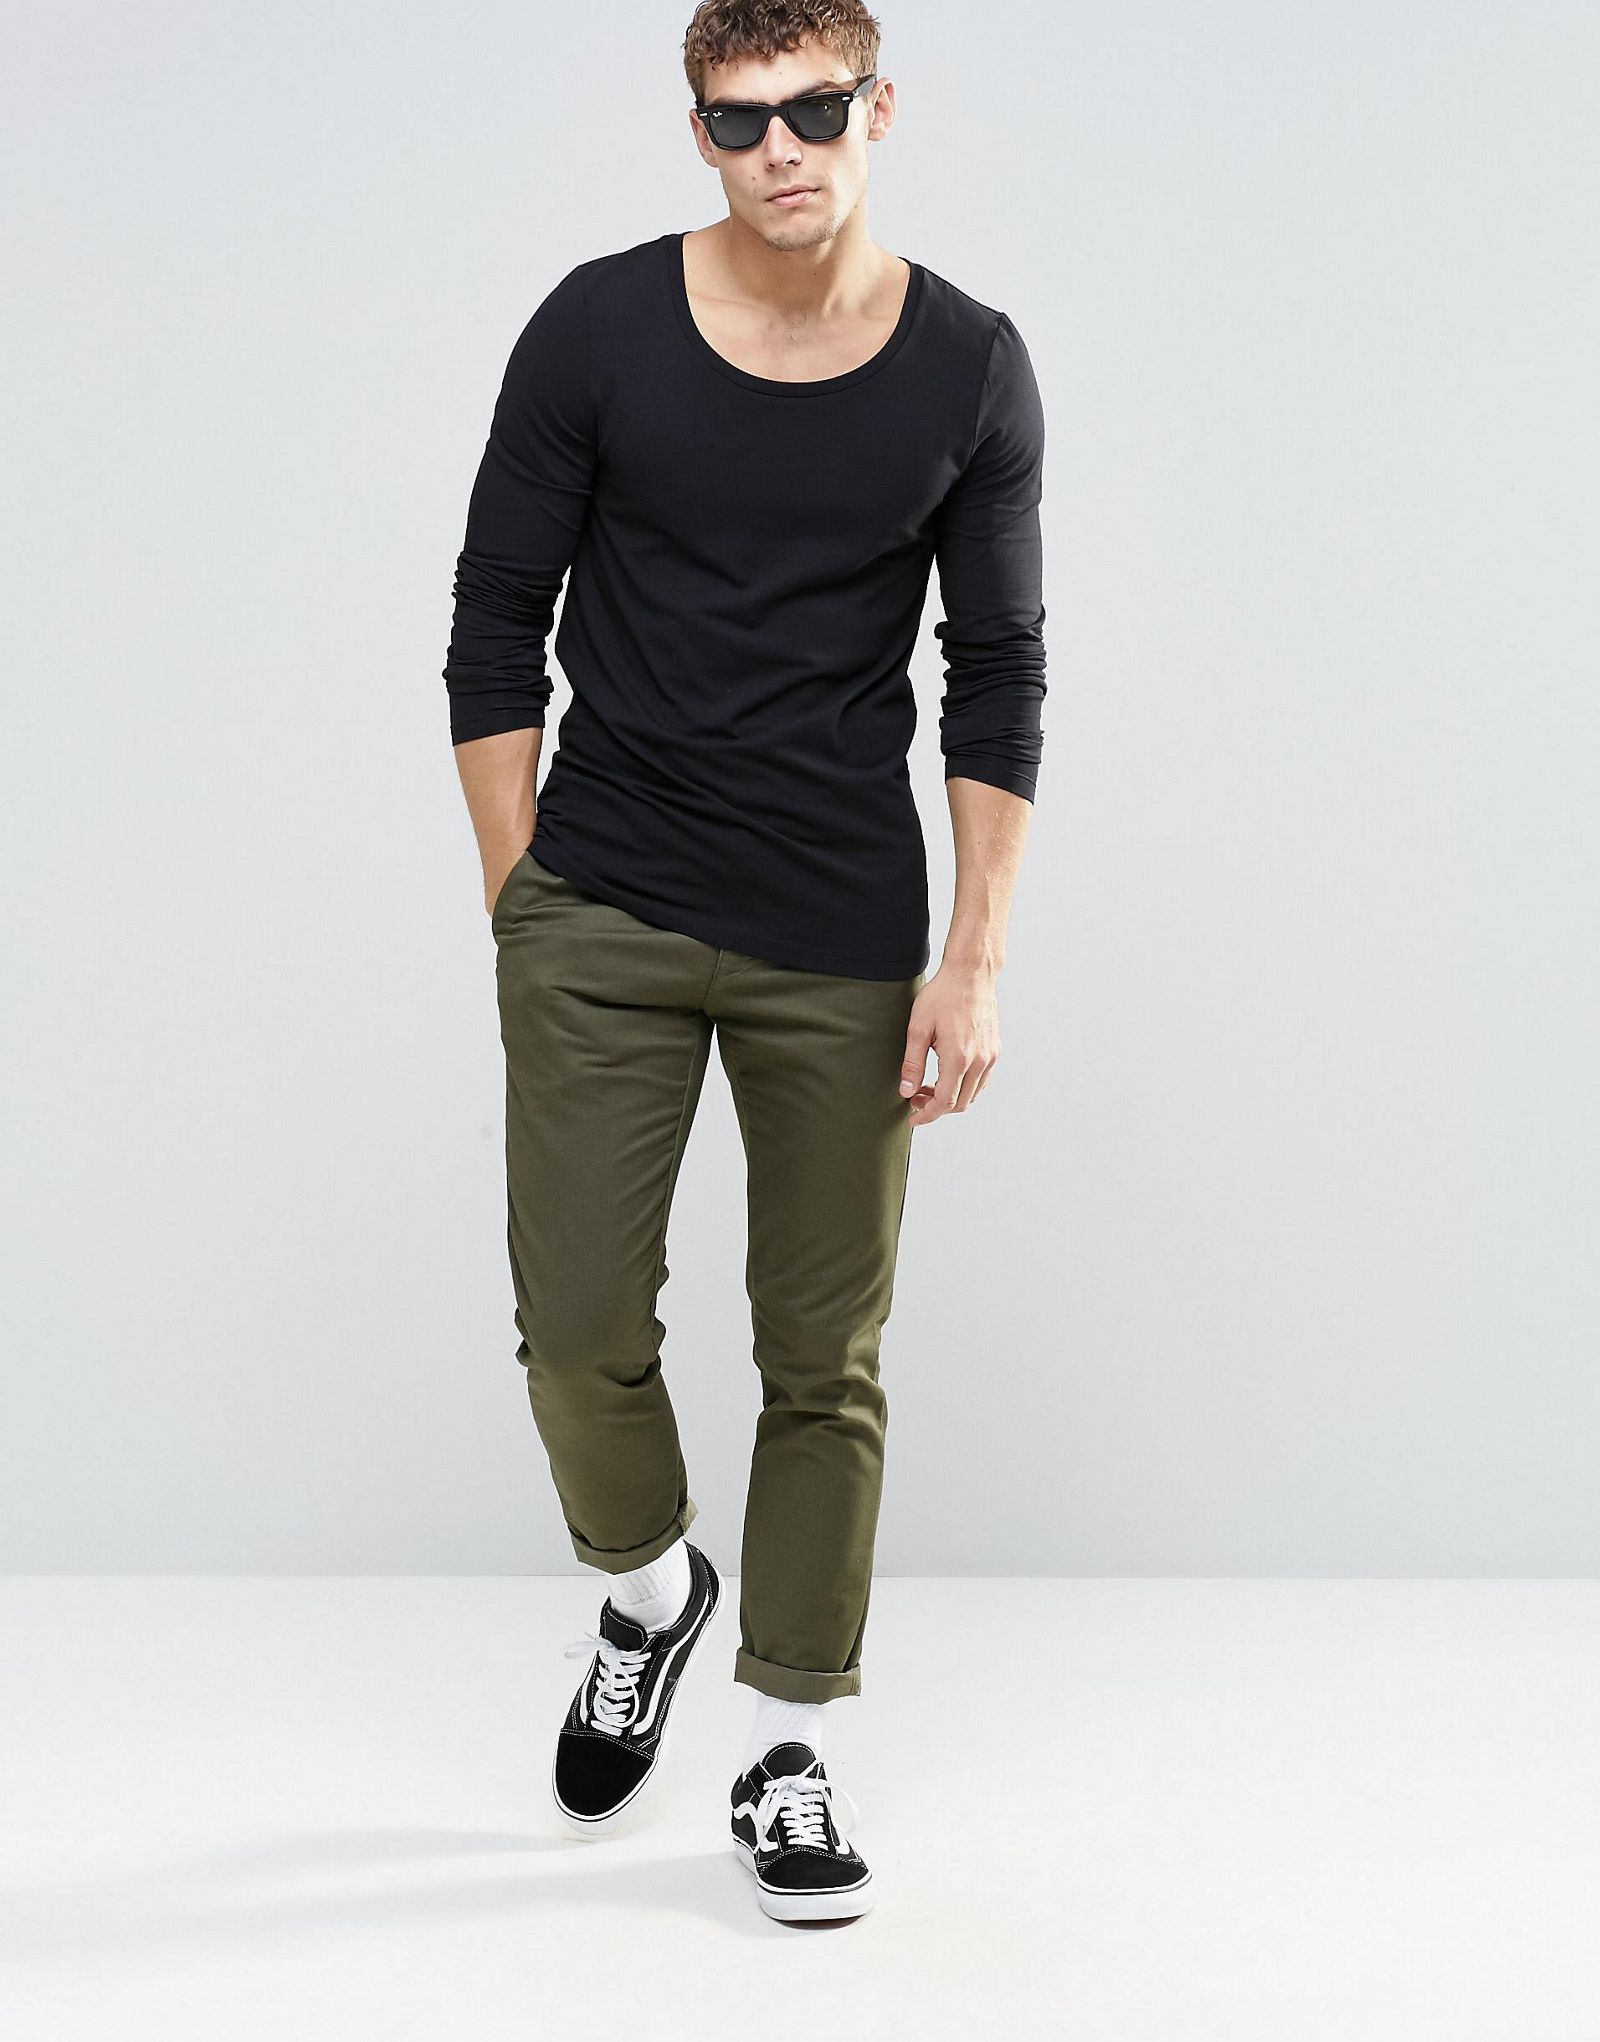 ASOS Muscle Long Sleeve T-Shirt With Scoop Neck In Black